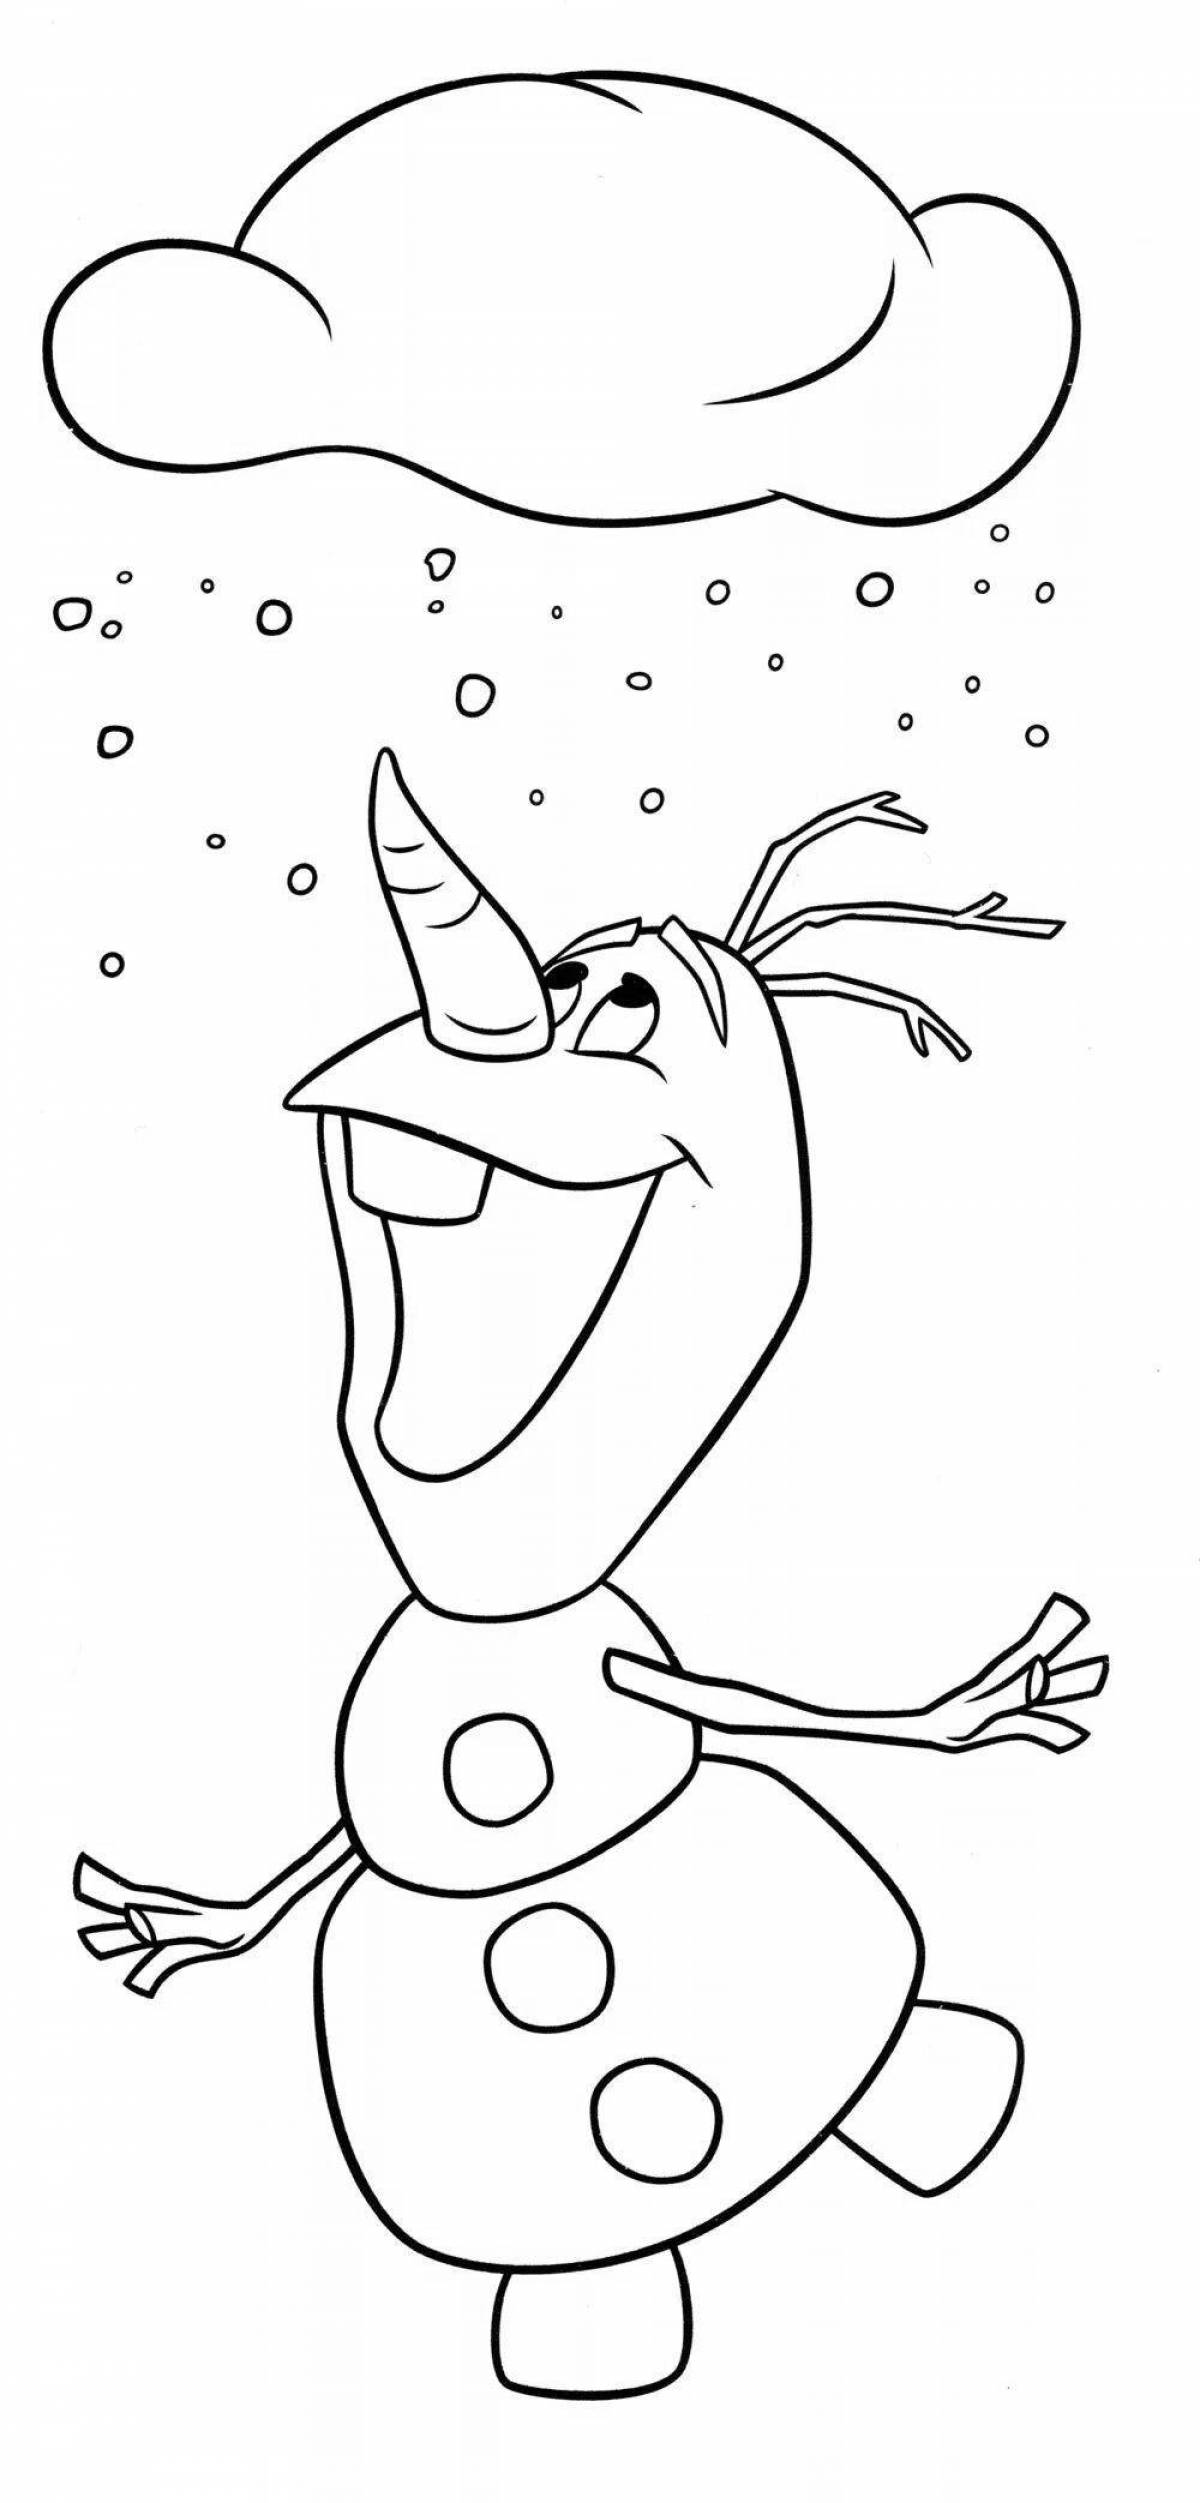 Olaf bright coloring for kids